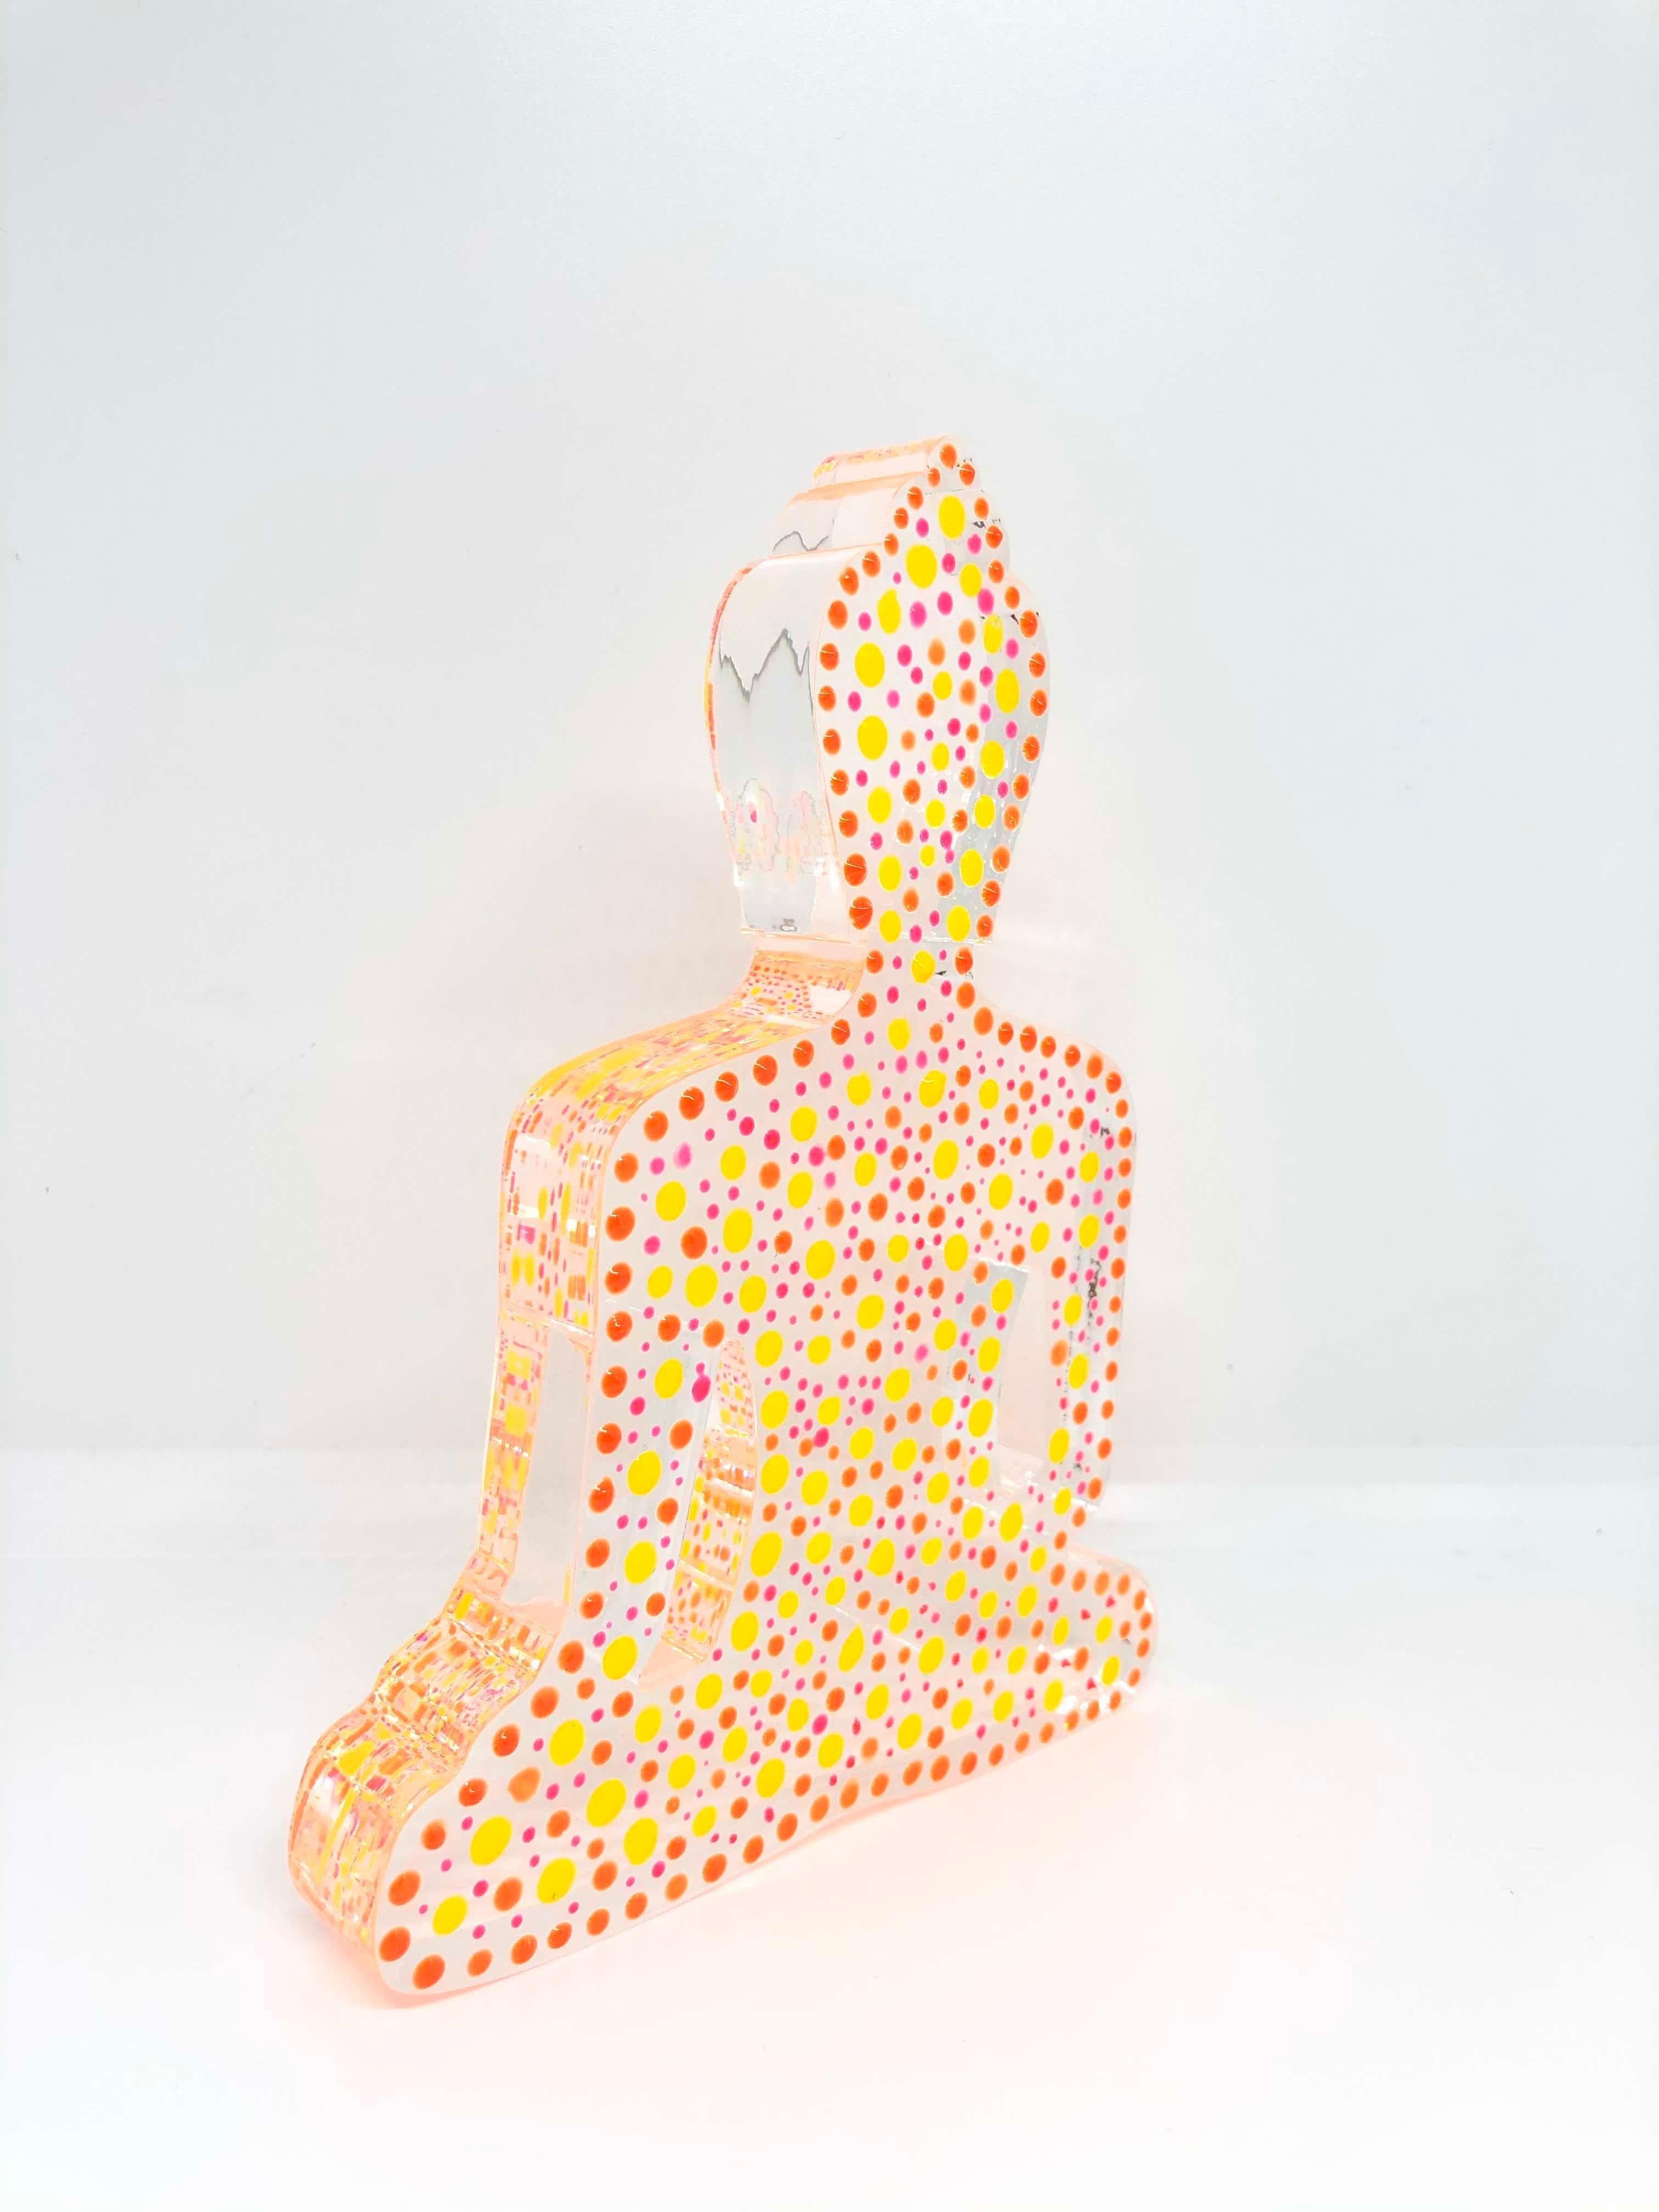 Dotted buddha sculpture - Contemporary Sculpture by Tal Nehoray